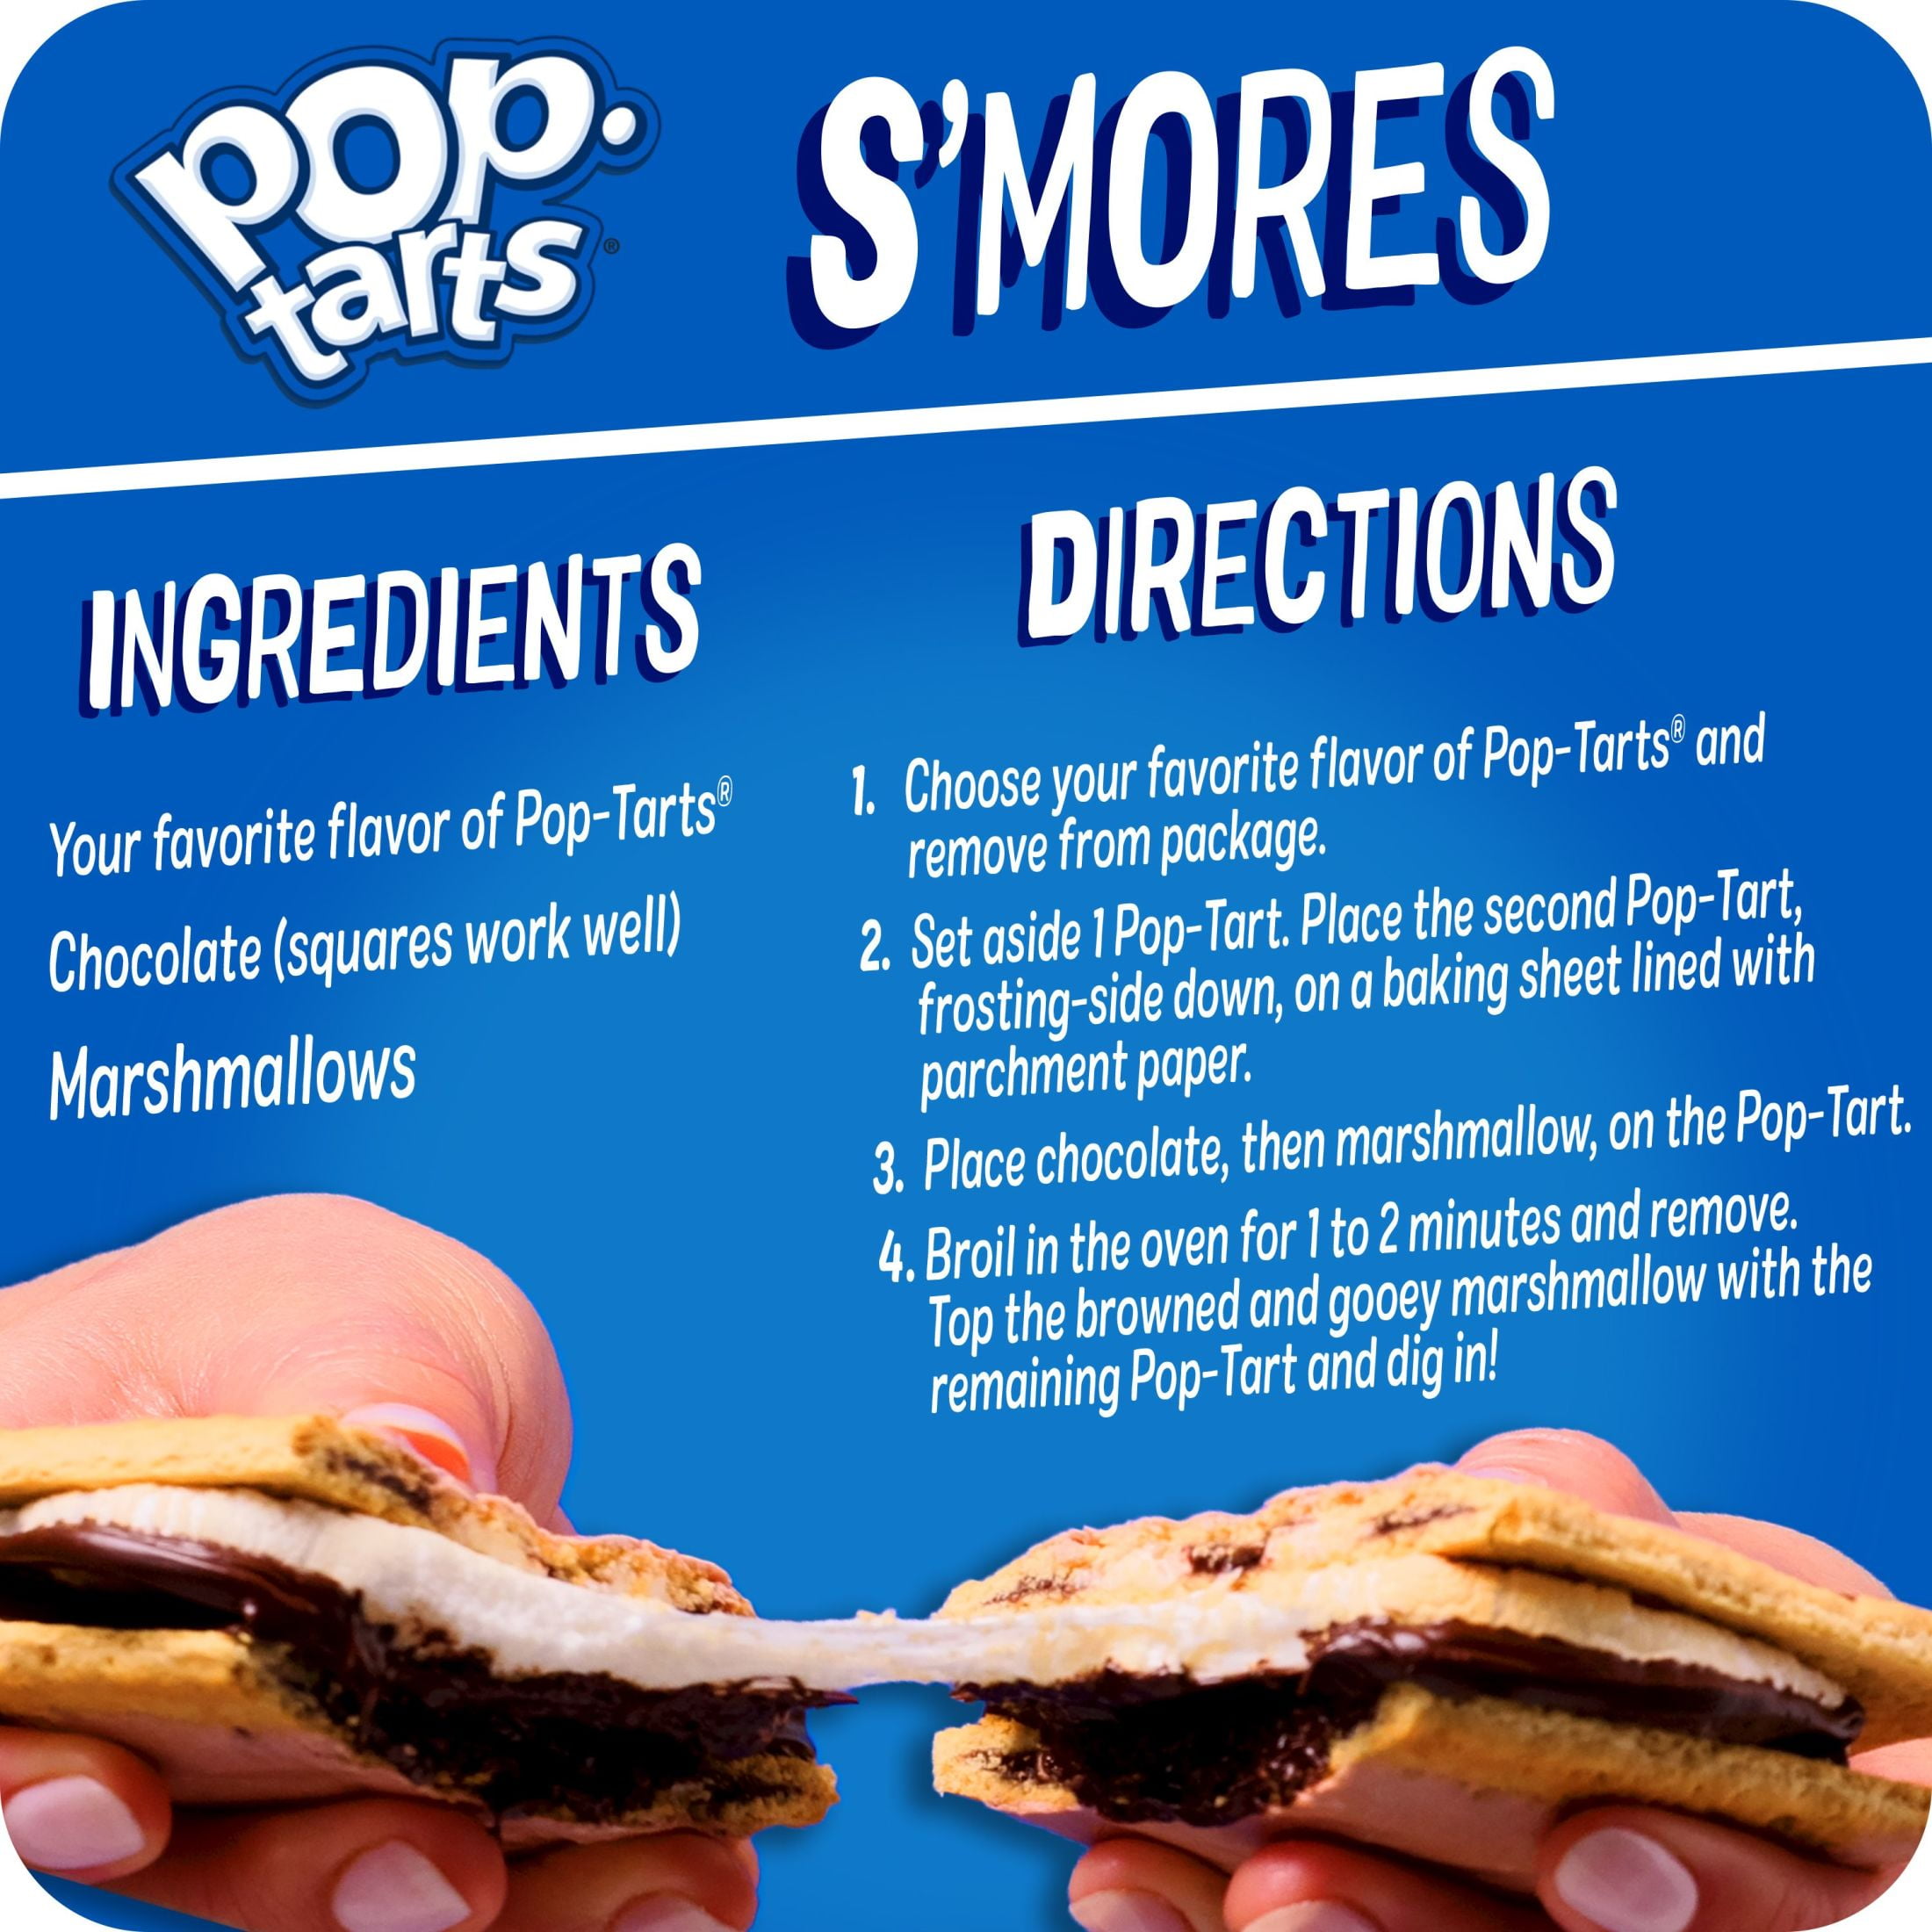 Pop-Tarts Toaster Pastries Frosted S'mores - 8 ct